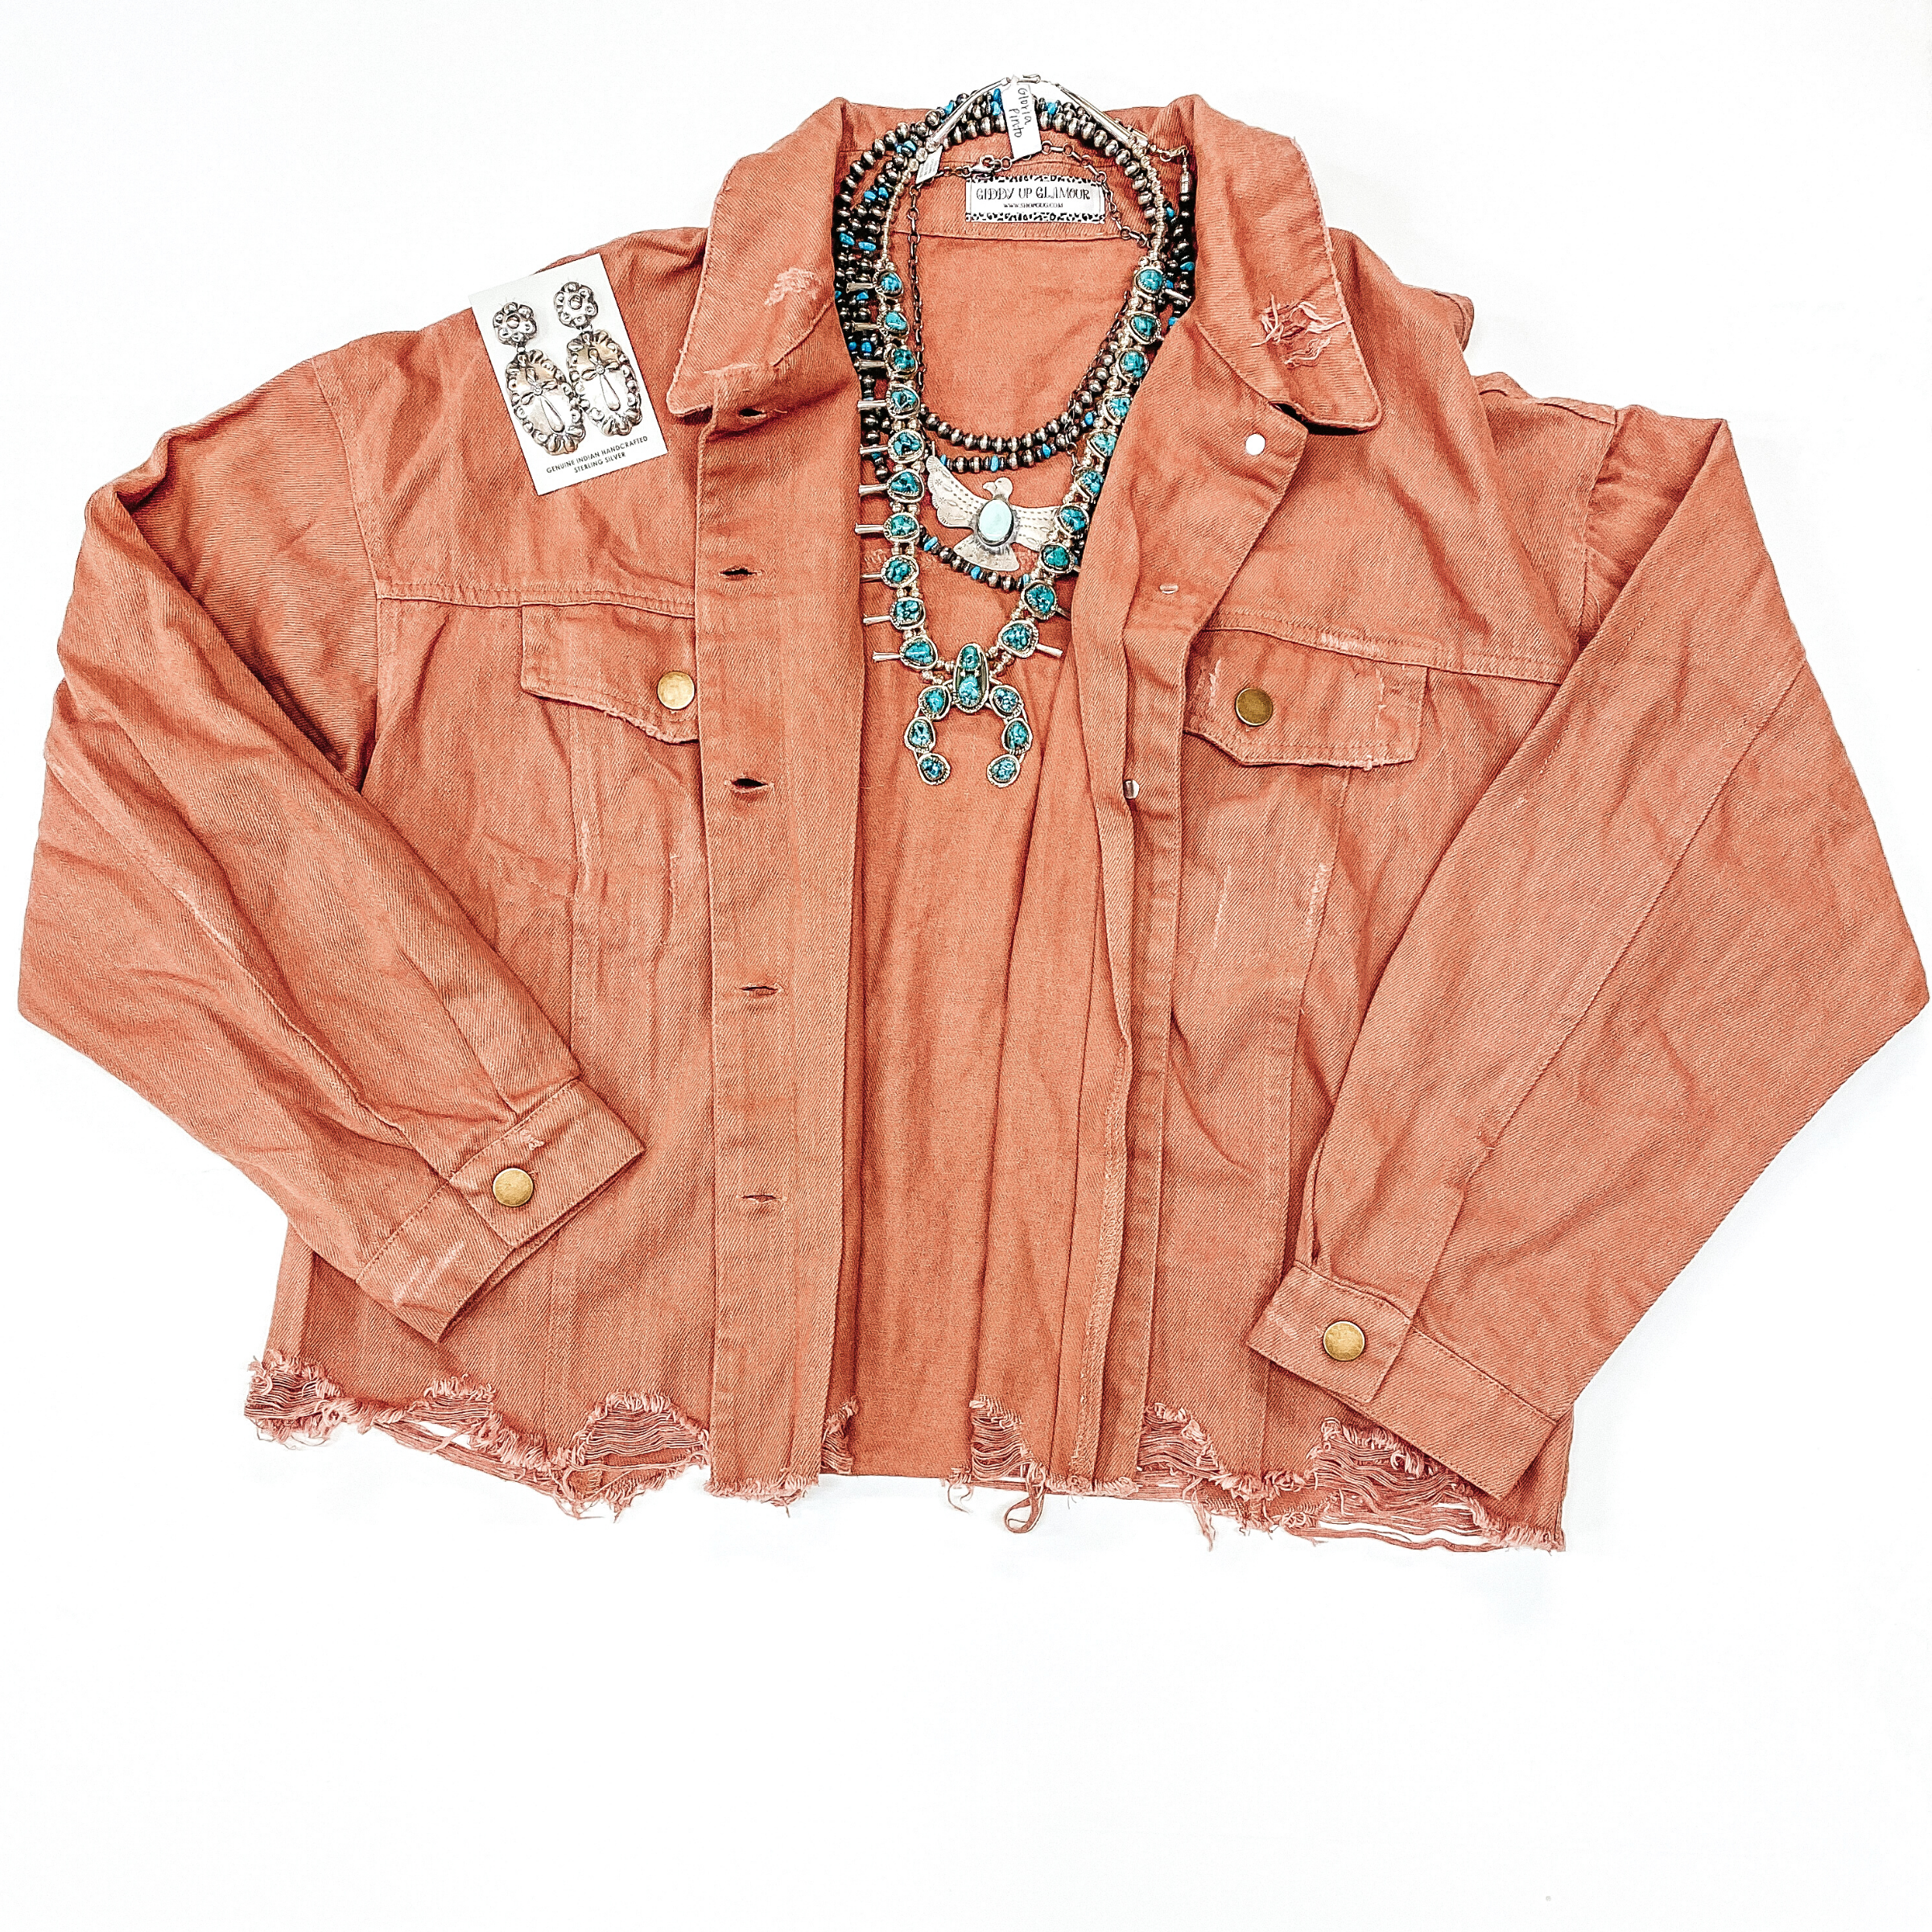 Plus Size | Admire Me Cropped Button Up Denim Jacket in Cinnamon - Giddy Up Glamour Boutique